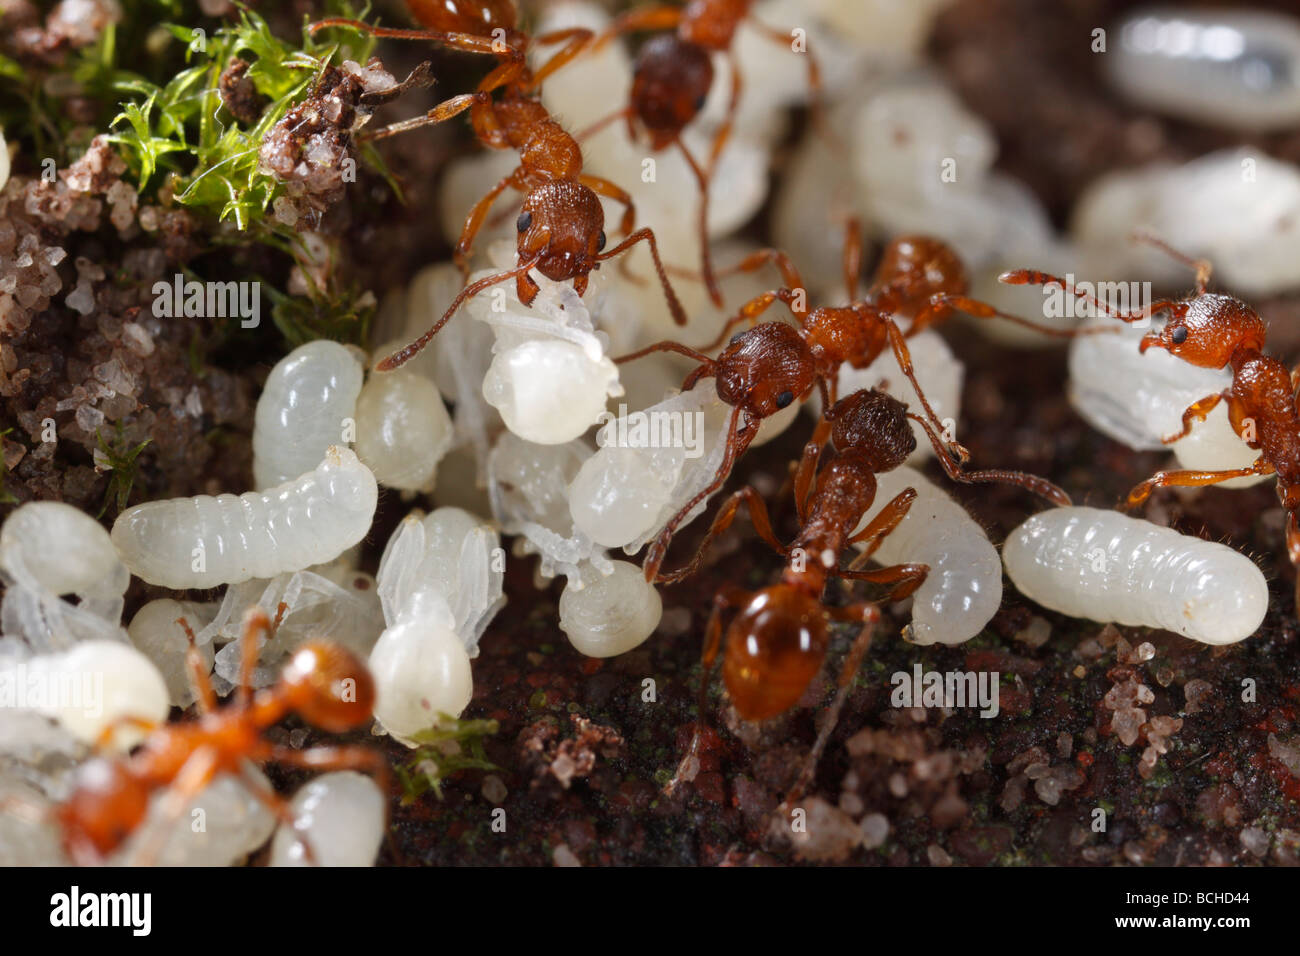 Ants of the genus Myrmica bringing their larvae and pupae back underground after their nest has been disturbed. Stock Photo